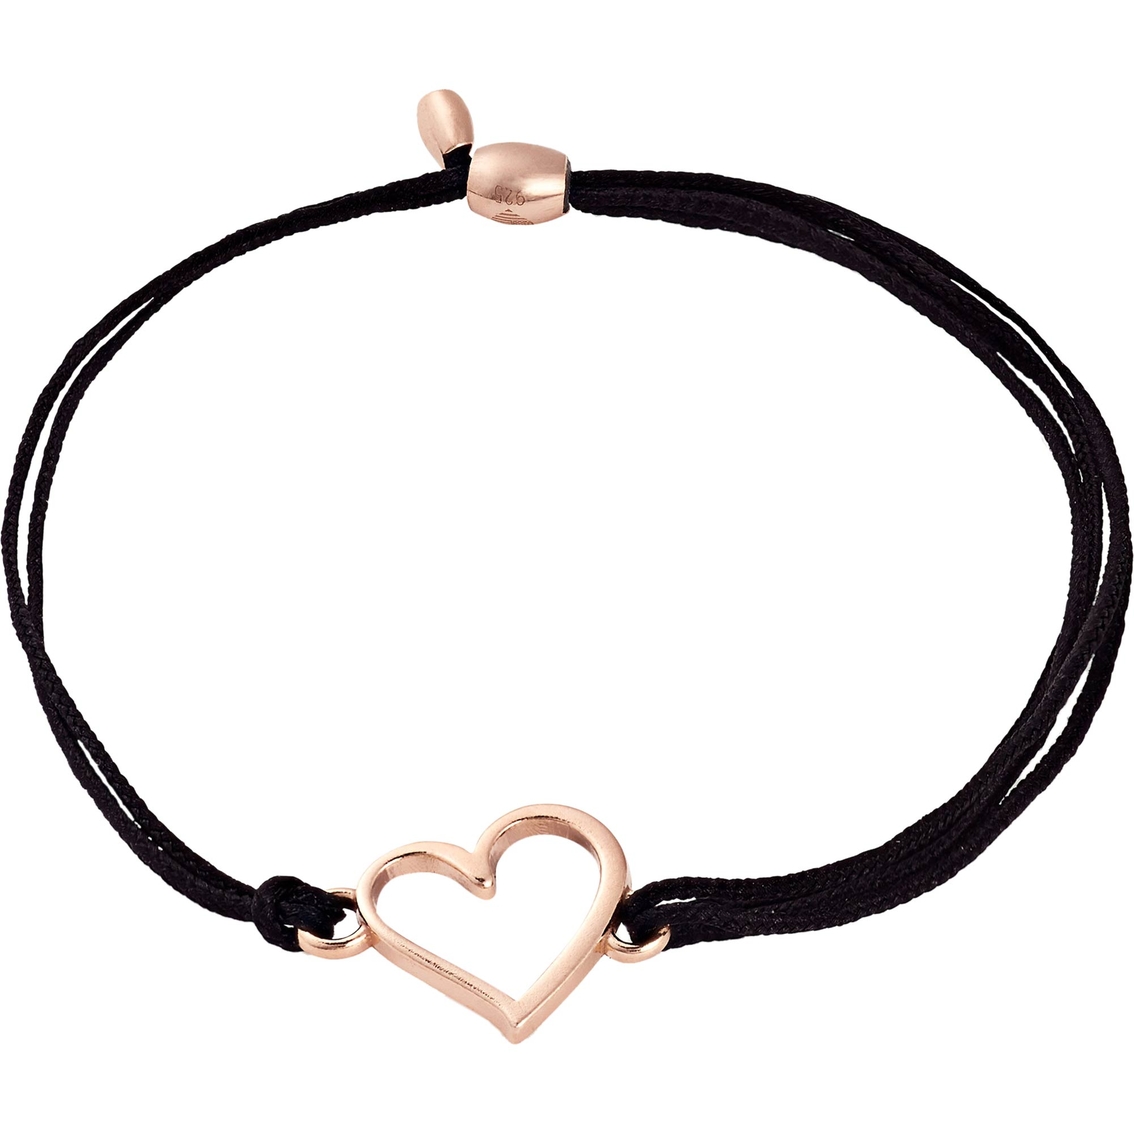 Alex And Ani Kindred Cord Heart Charm Bangle Bracelet | Atg Archive ...